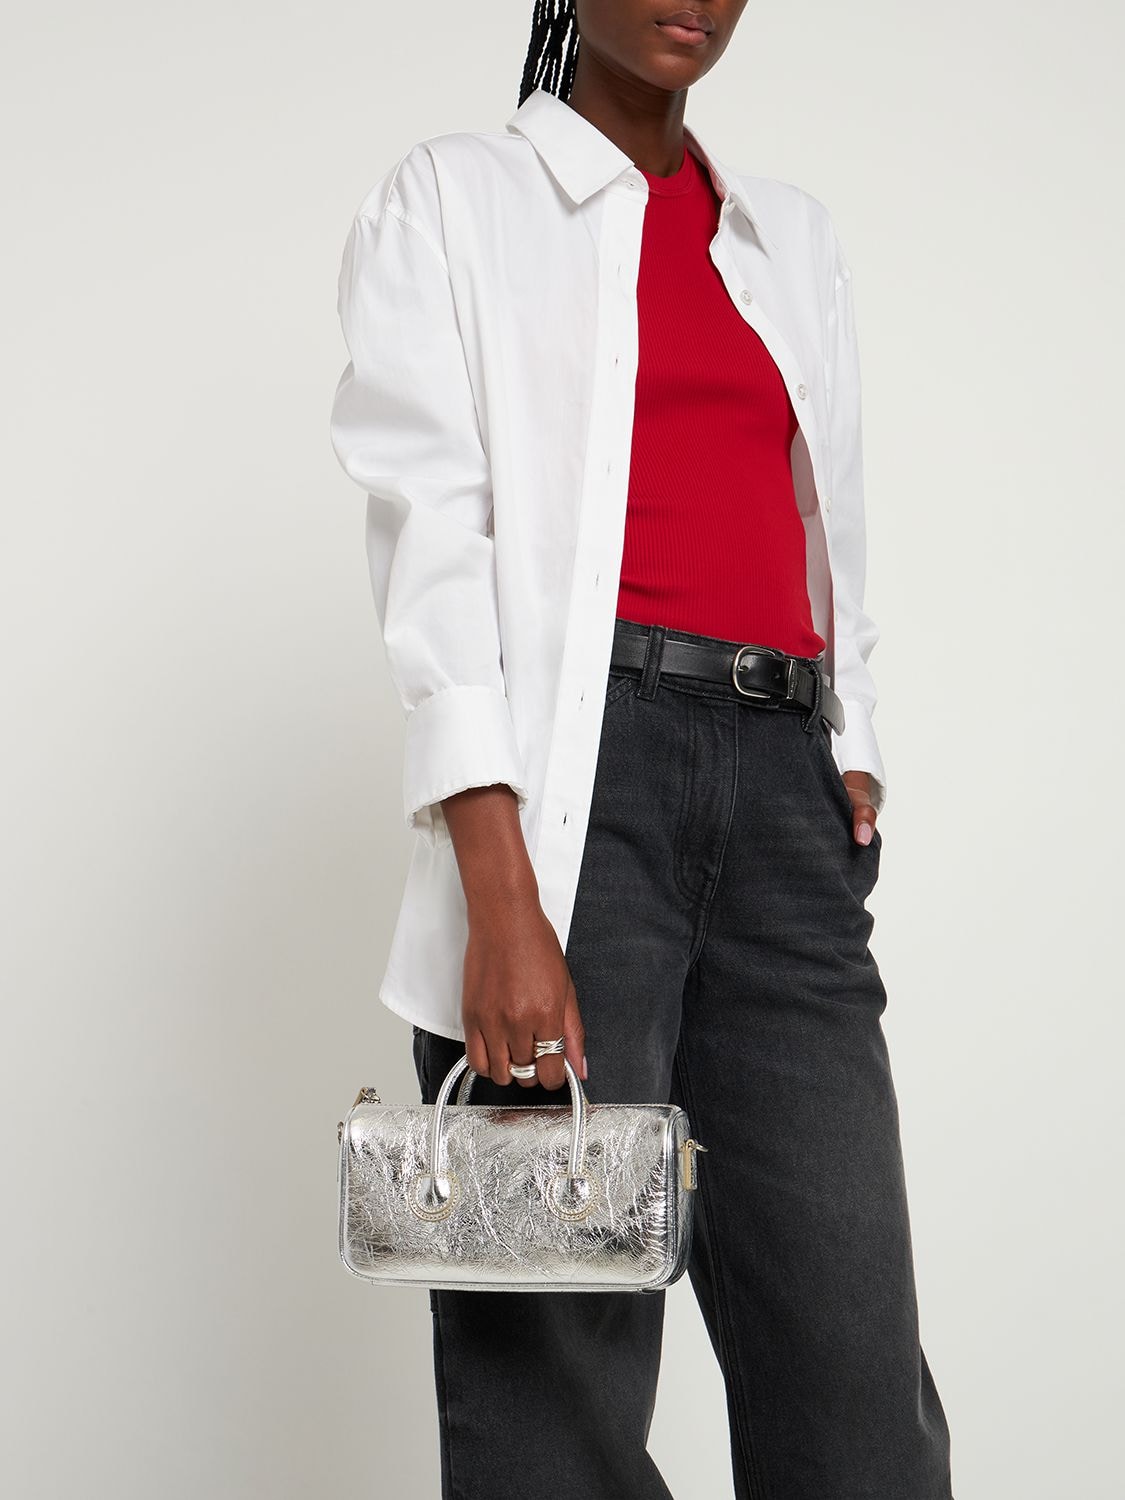 Marge Sherwood | Women Small Zipper Metallic Leather Bag Silver Crinkle Unique